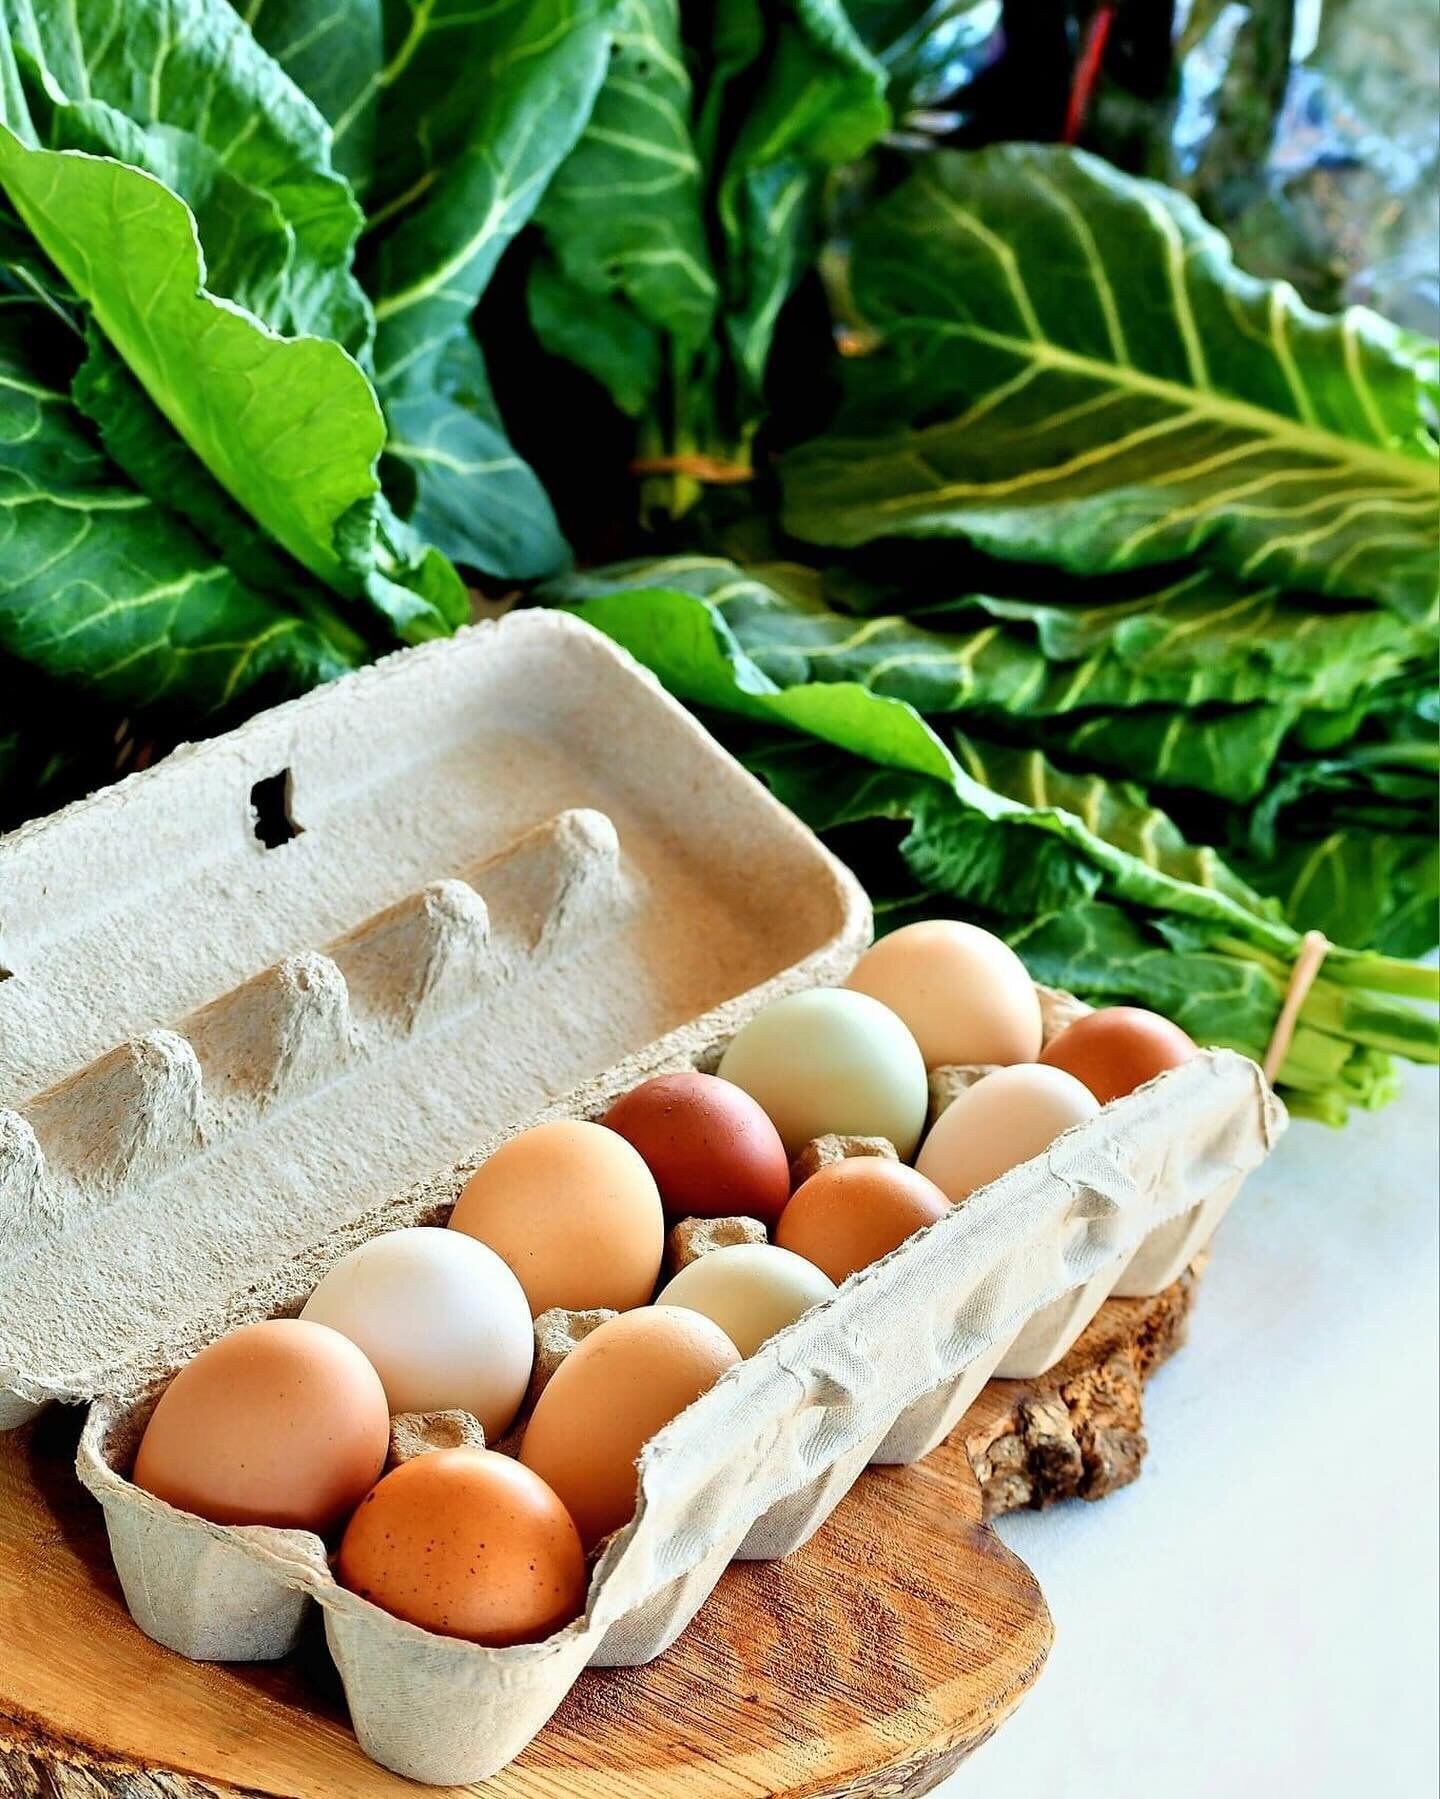 Catch us every Saturday at the @hotspringsfarmersmarket 9am - 12pm with several cold-weather goodies. Catch us every other moment soil blocking, seeding, bed prepping, planting, repeat. 🥰 Eggs and collards 📸: @pam8100